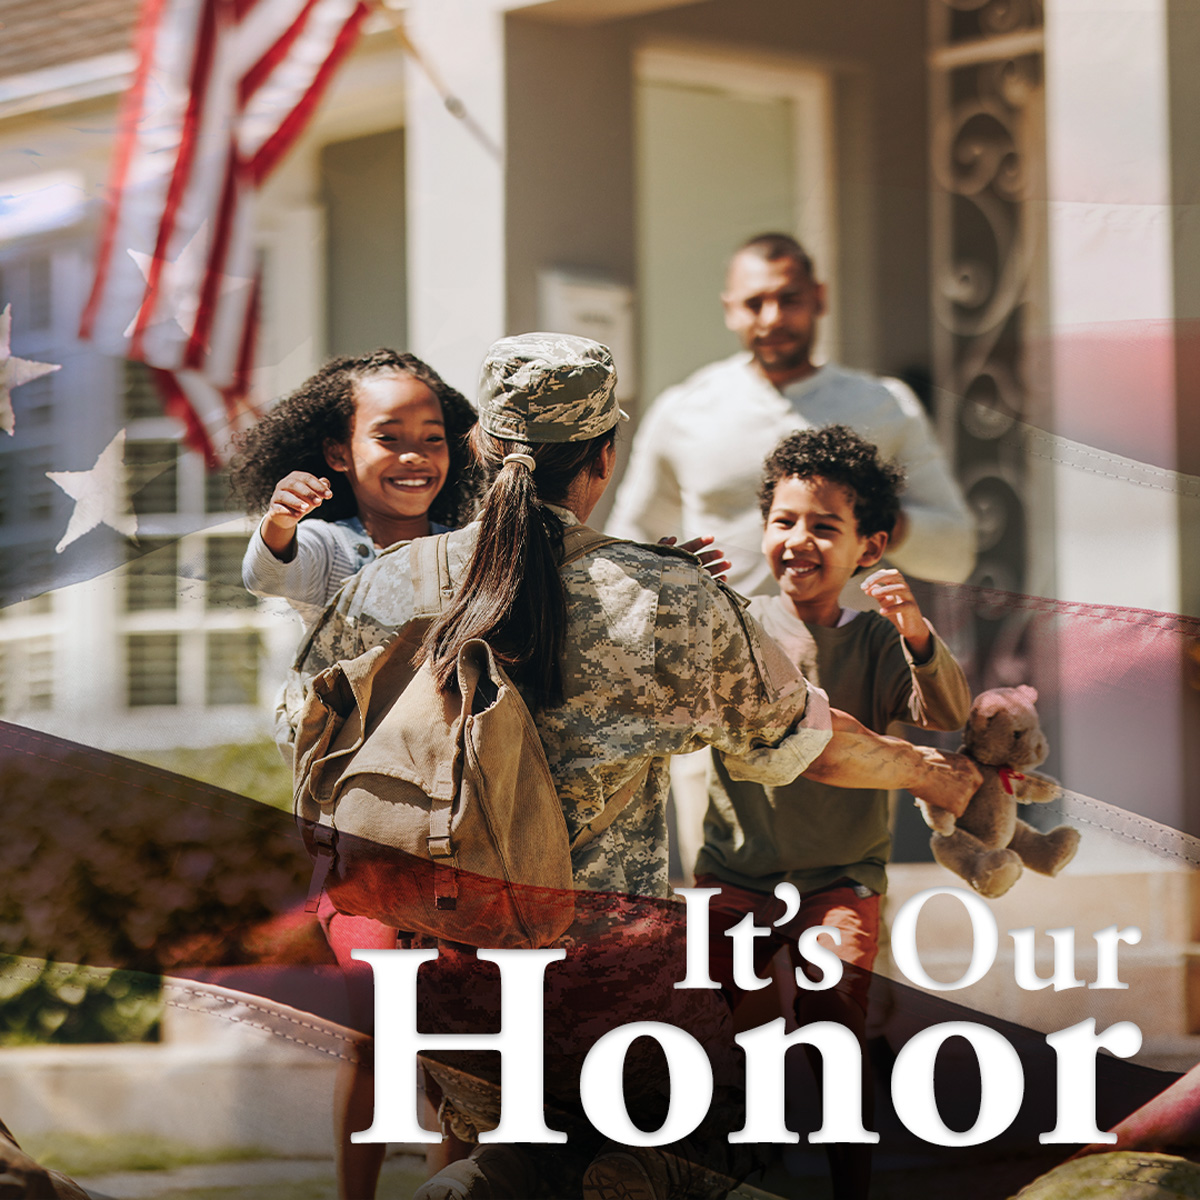 You make countless sacrifices for your country. Let us provide you with purchase and refi loan options that do away with money down, mortgage insurance, appraisals and more. Contact Acadia Lending Group today so we can start serving you. #USVeteran

NMLS 370636
📞 (207) 899-4500